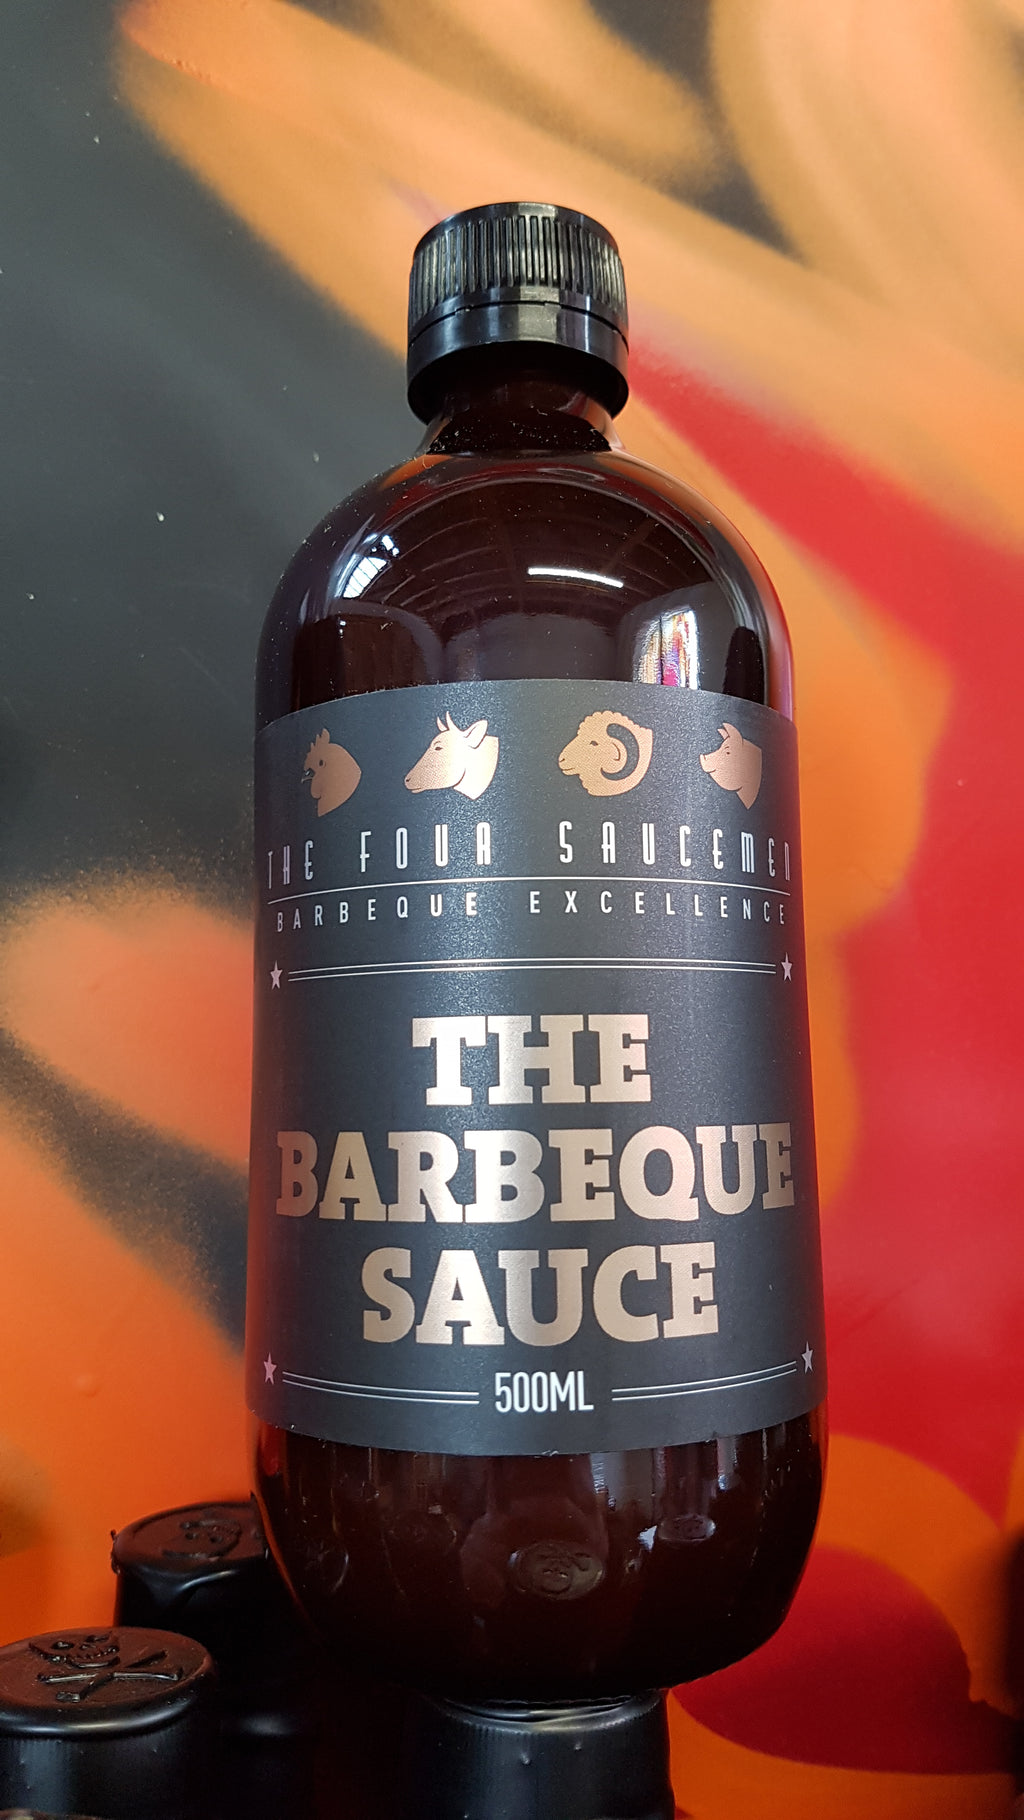 The Barbeque Sauce 500ml by The Four Sauceman